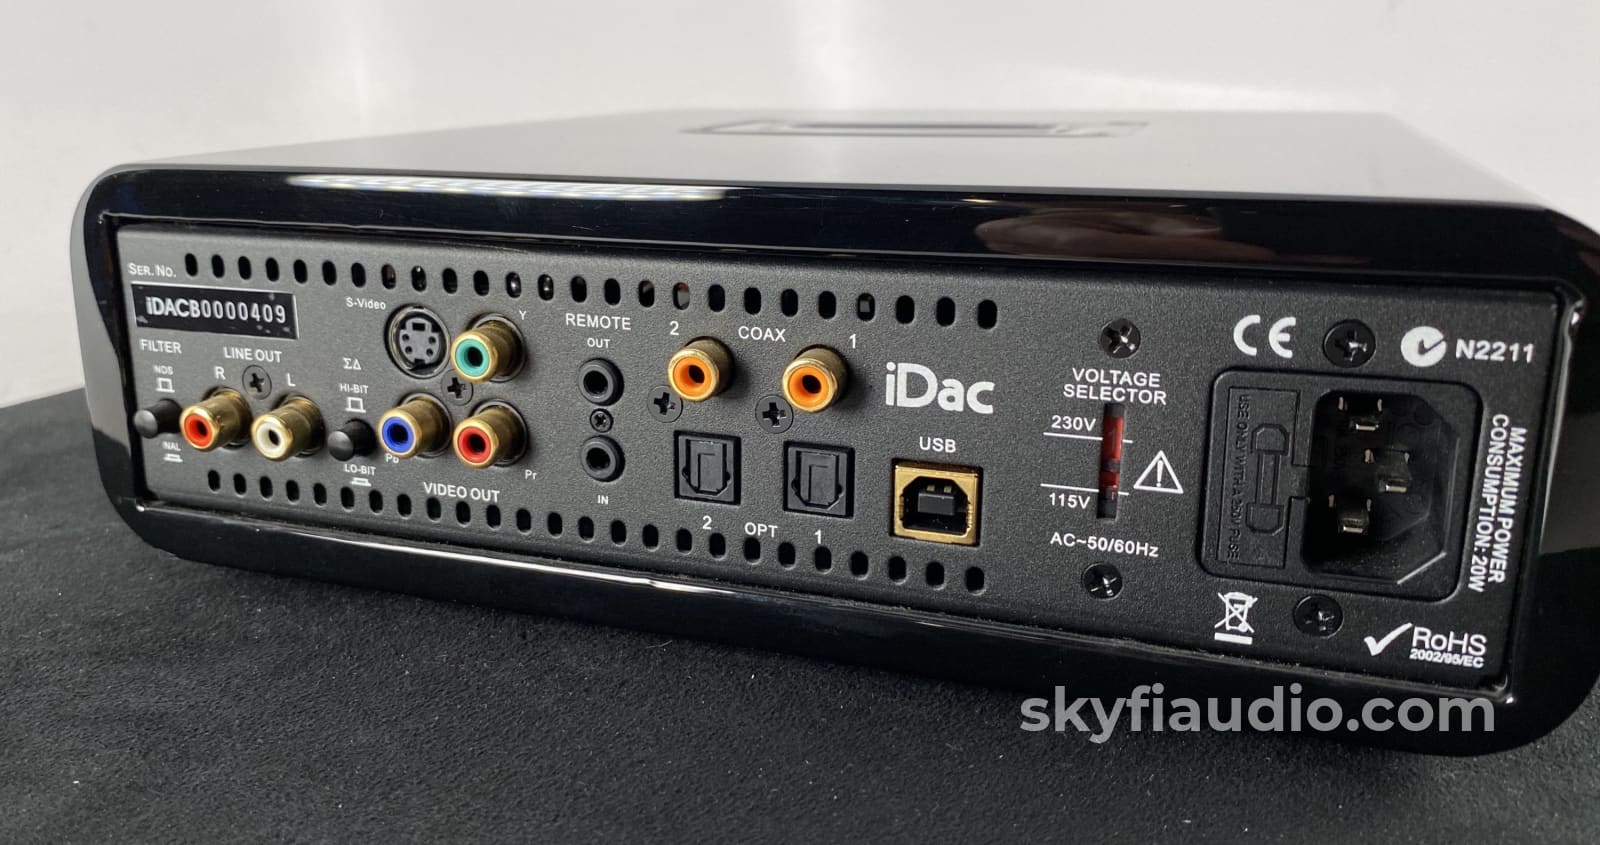 Peachtree Audio Idac Stereophile Class A Rated Ess Sabre Dac Cd + Digital